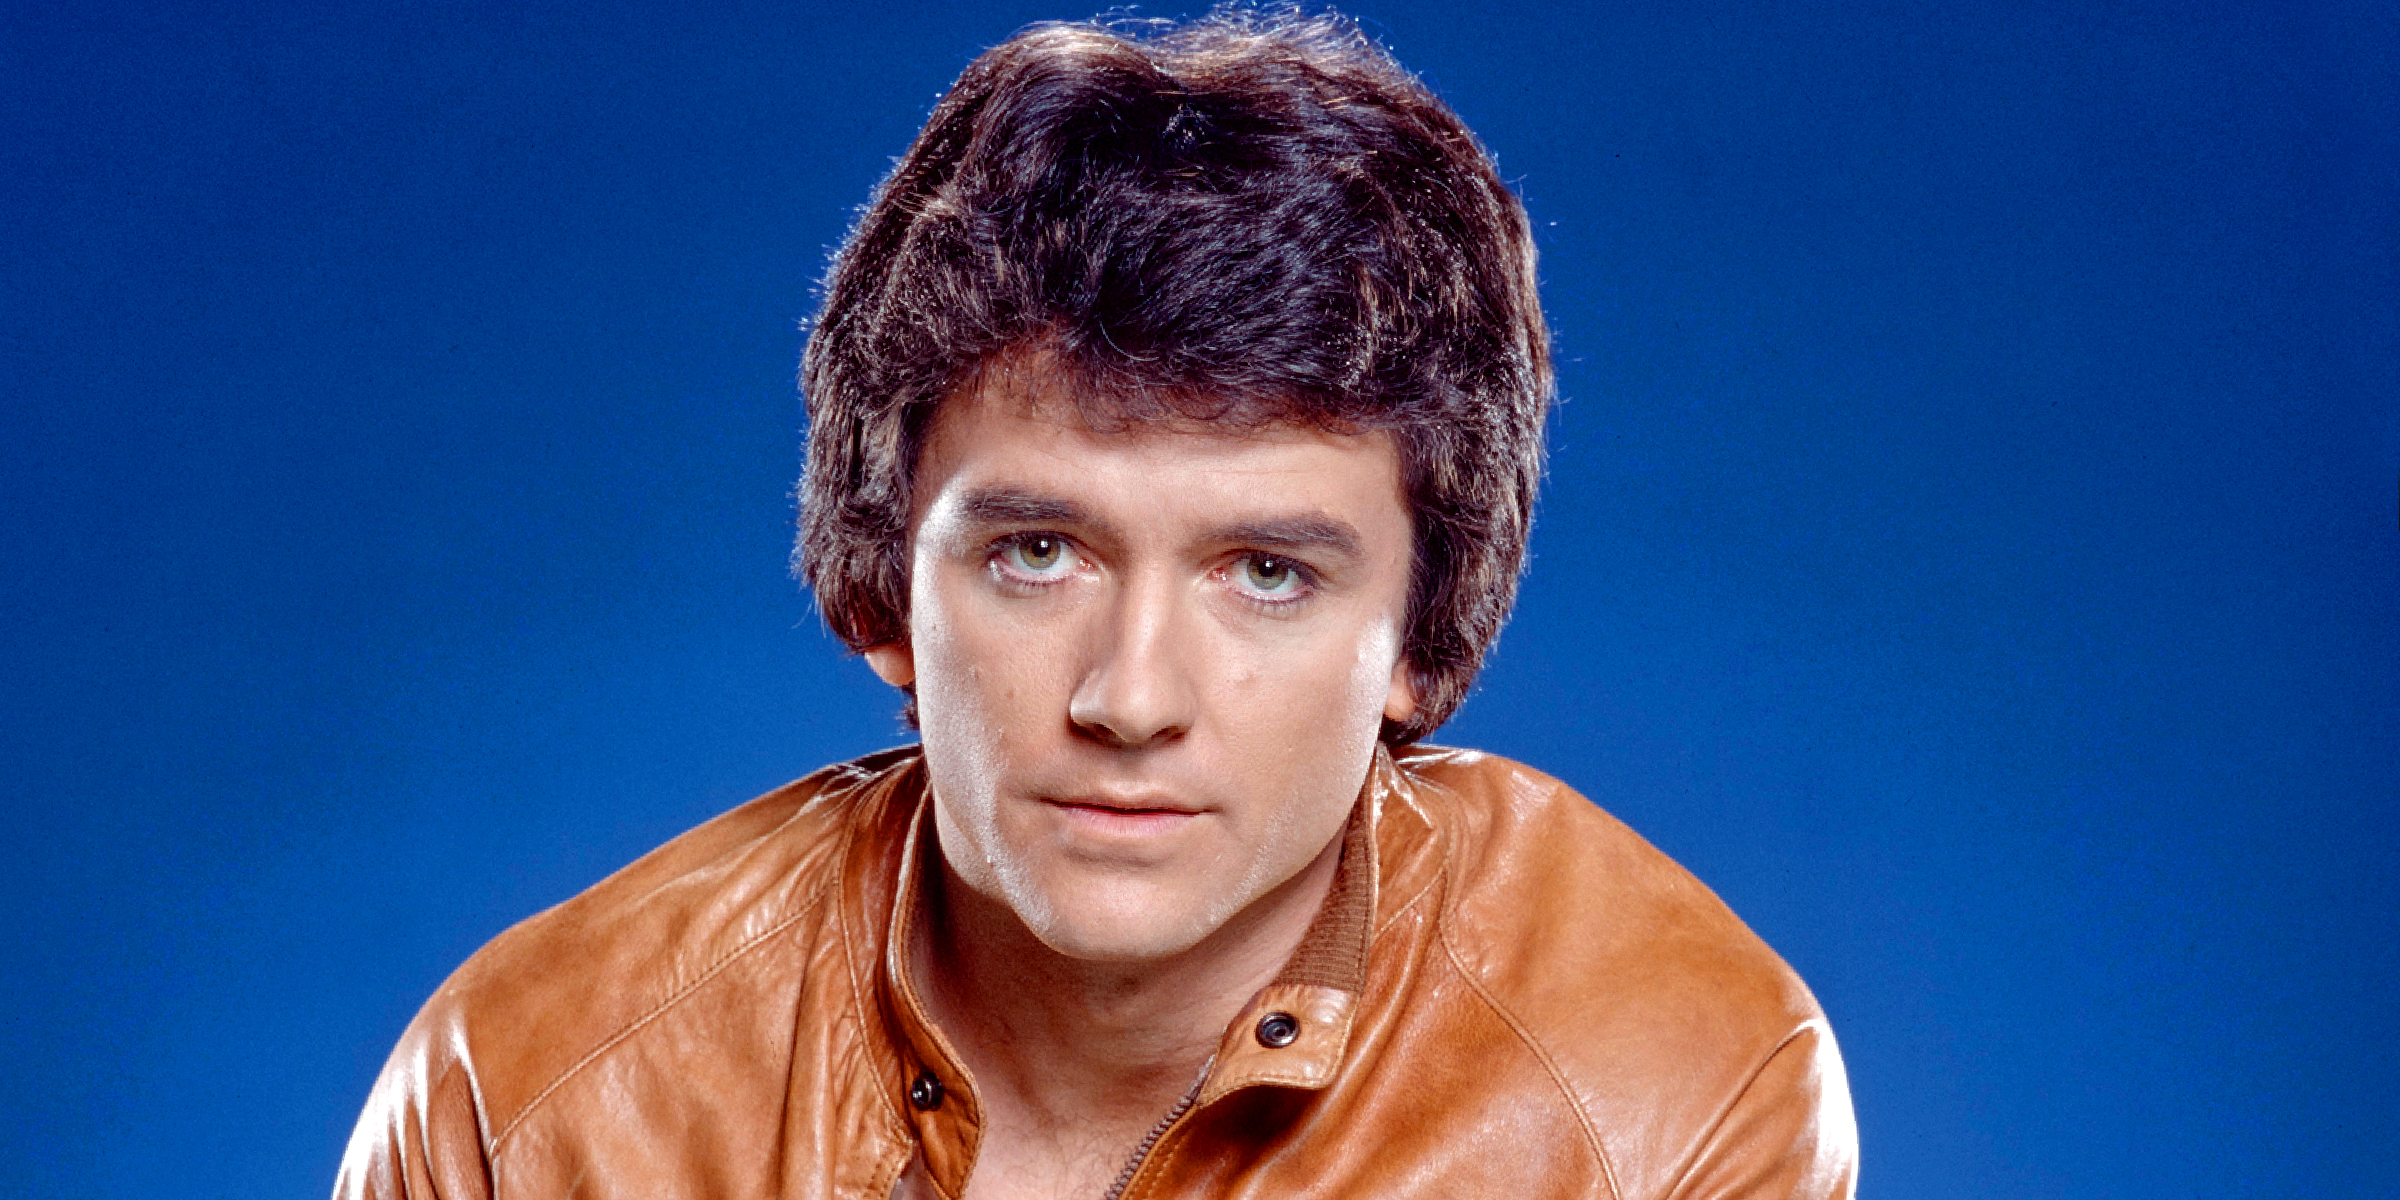 Patrick Duffy in a 1978 "Dallas" publicity photo. | Source: Getty Images